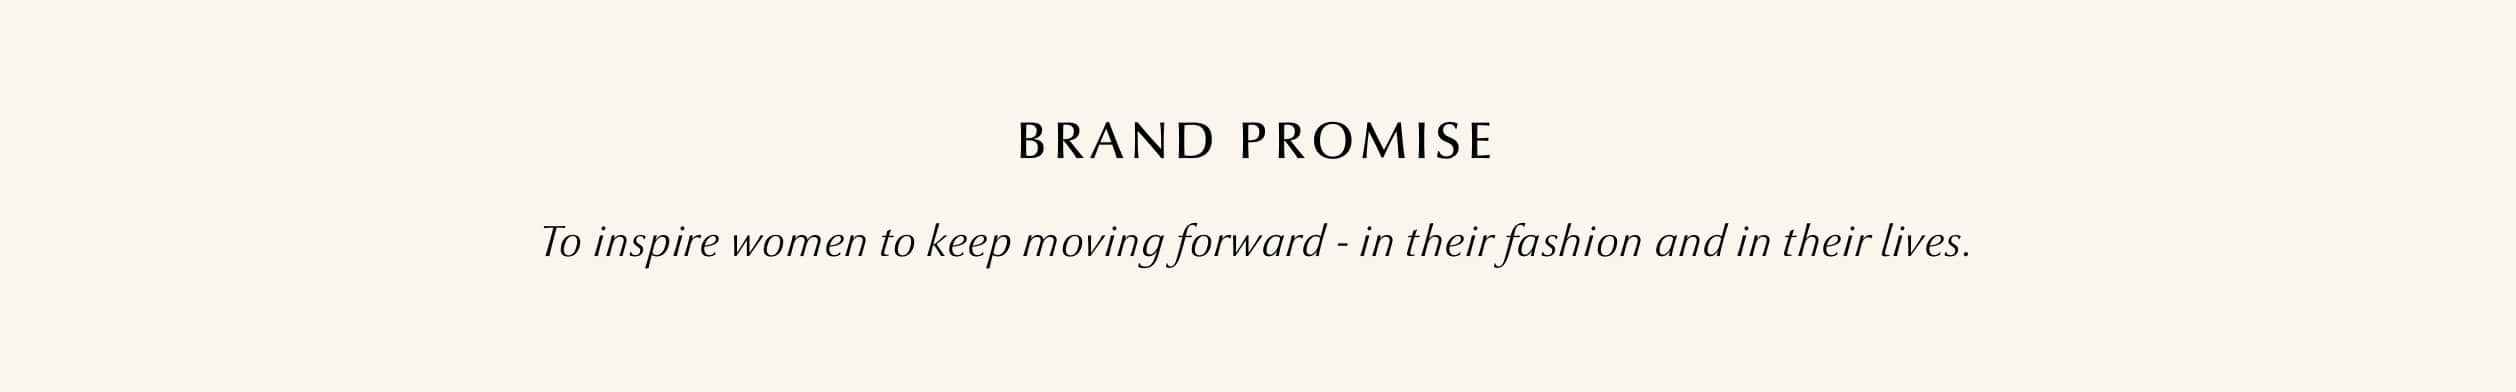 Brand Promise - To inspire women to keep moving forward - in their fashion and in their lives.